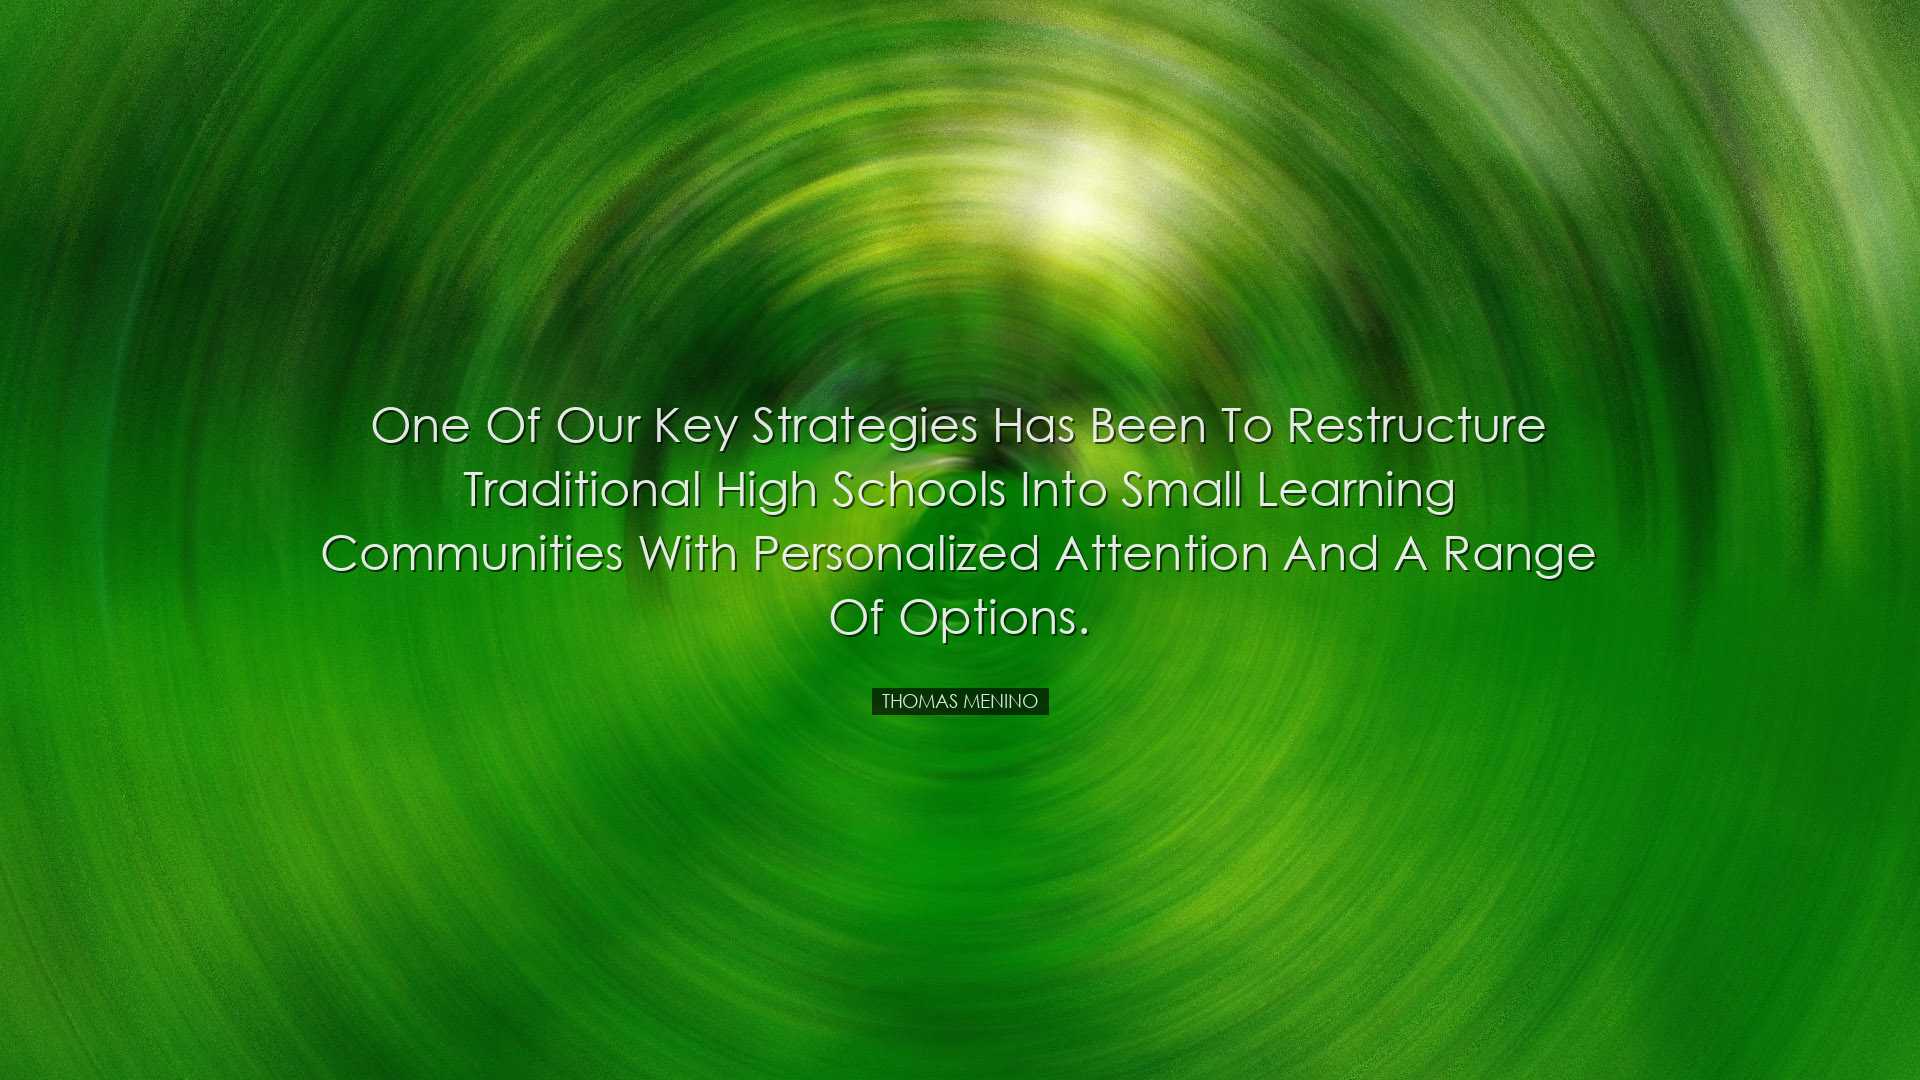 One of our key strategies has been to restructure traditional high